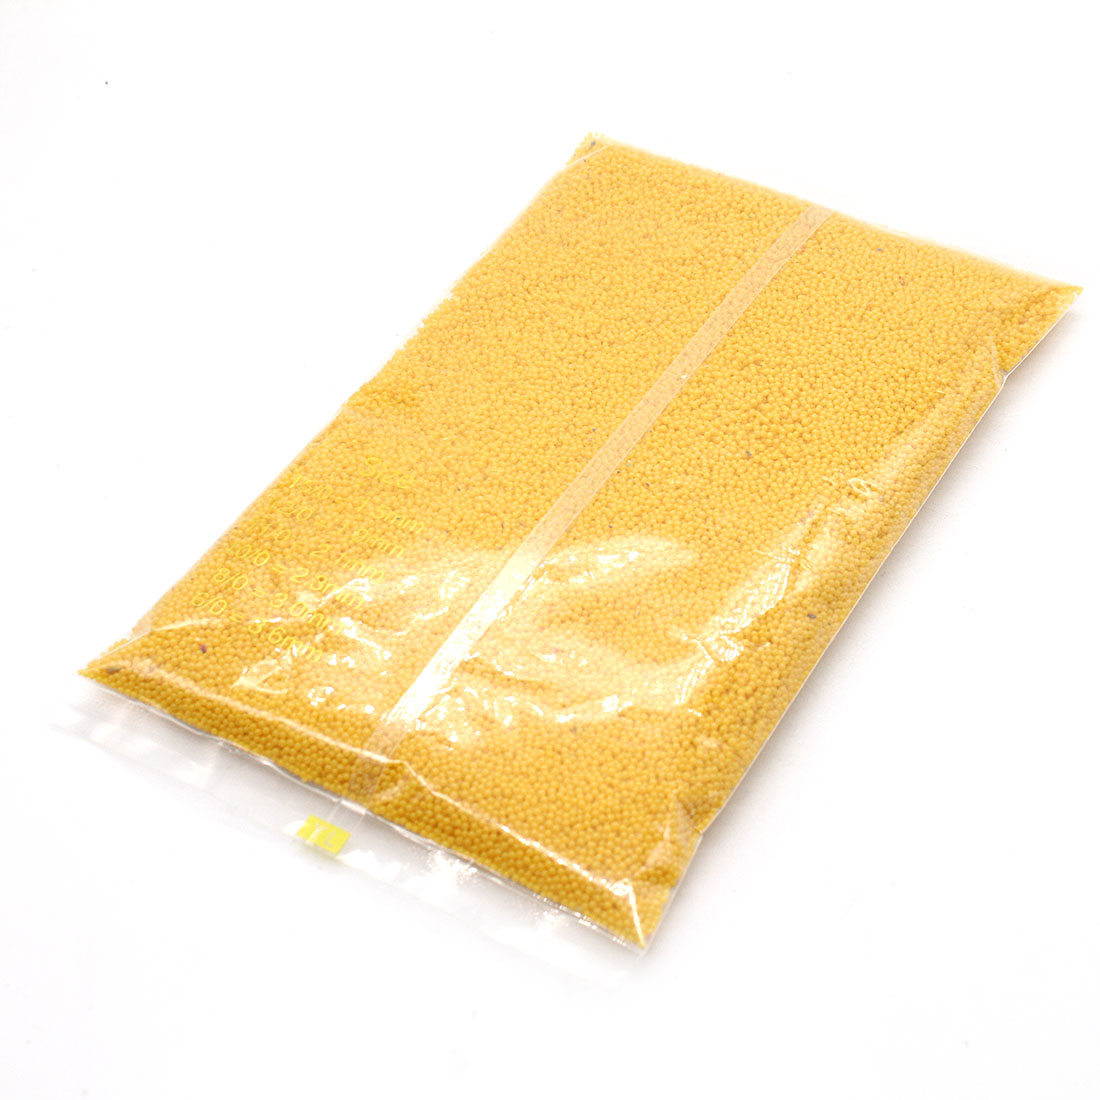 Yellow, 0.6 to 0.8 mm